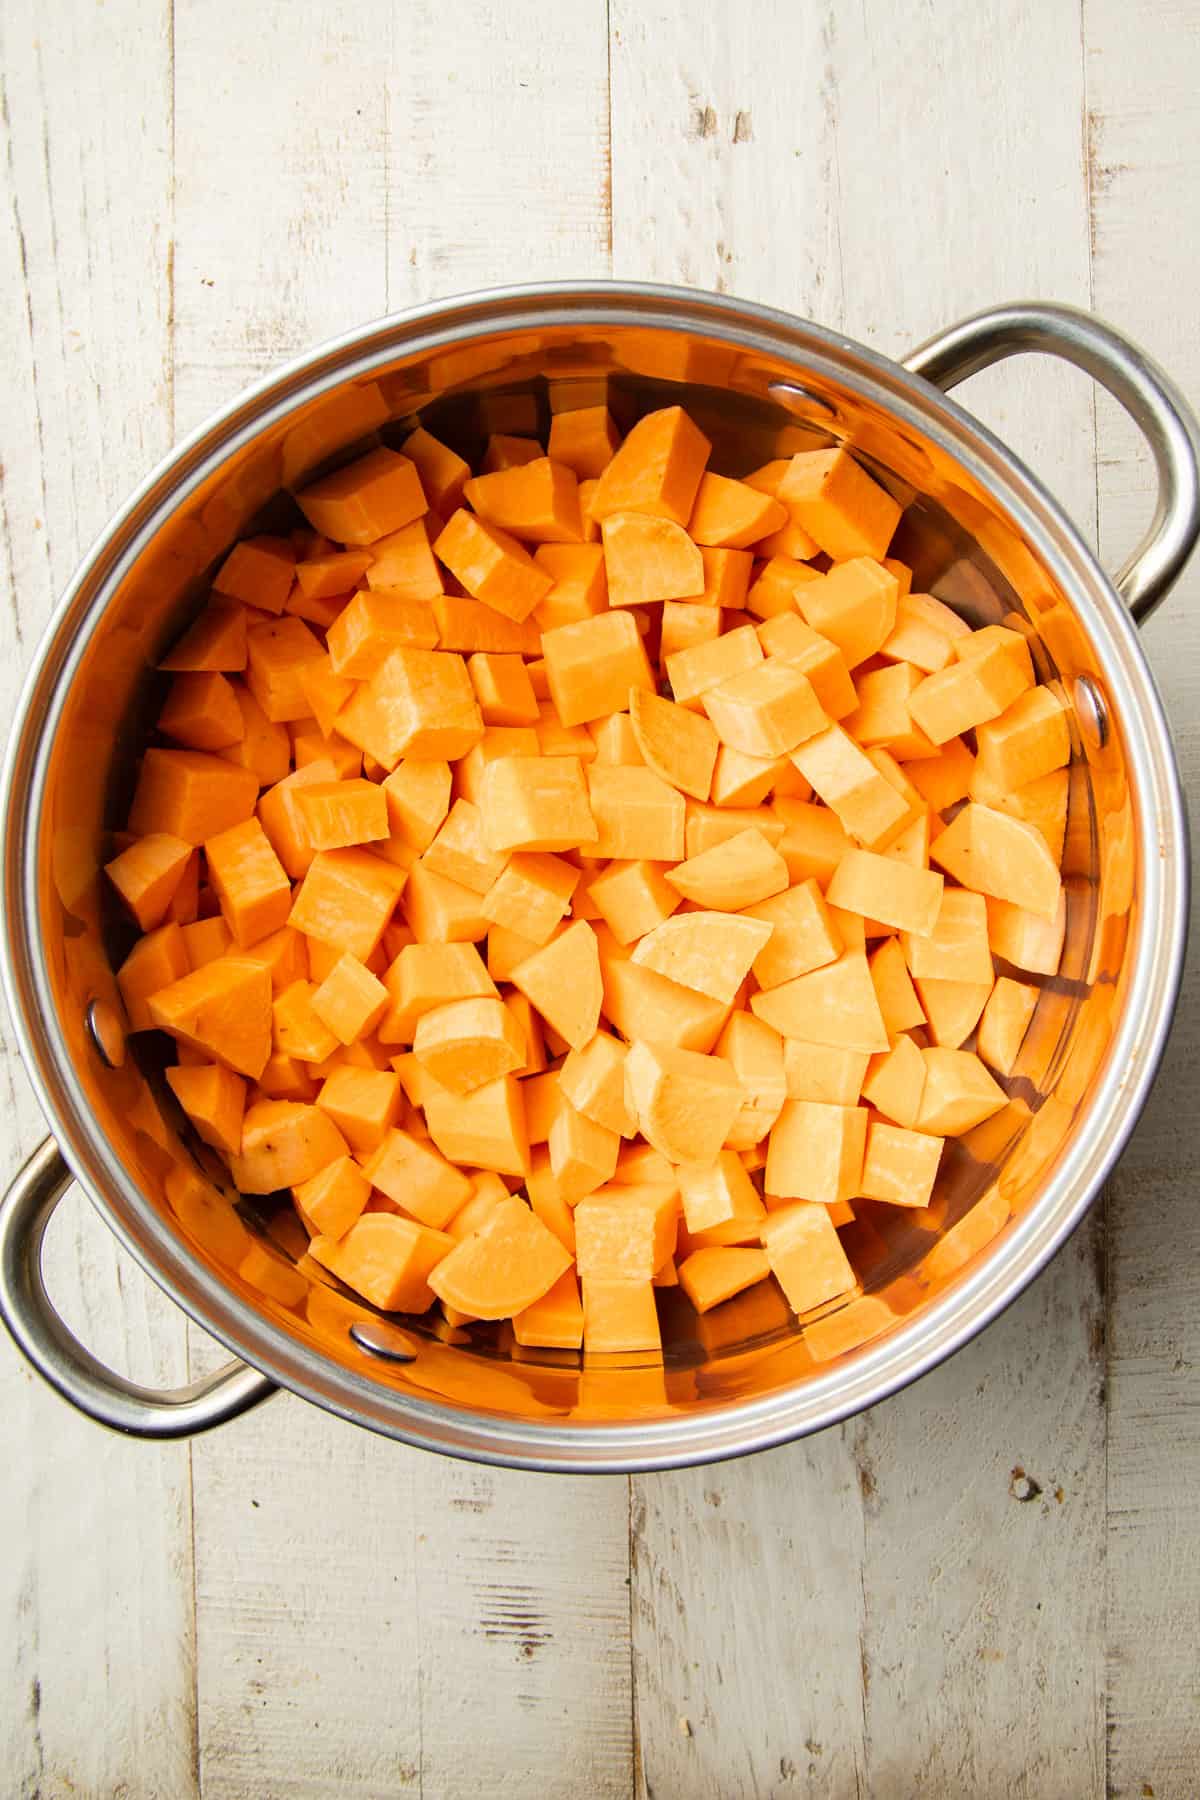 Diced sweet potatoes in a pot of water.